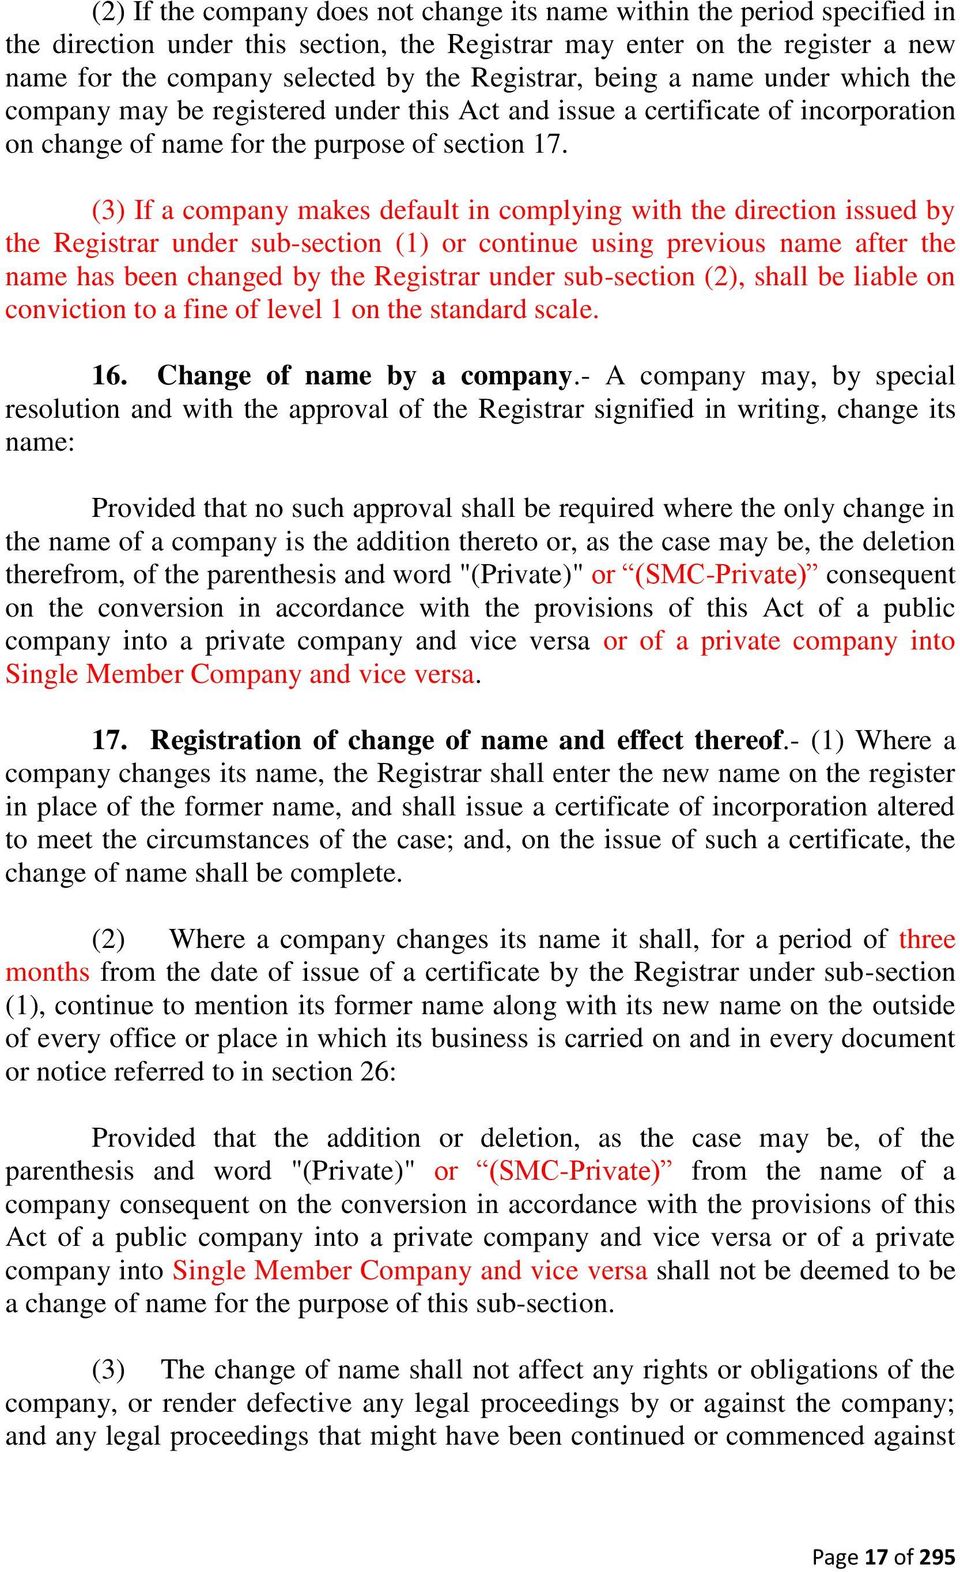 (3) If a company makes default in complying with the direction issued by the Registrar under sub-section (1) or continue using previous name after the name has been changed by the Registrar under